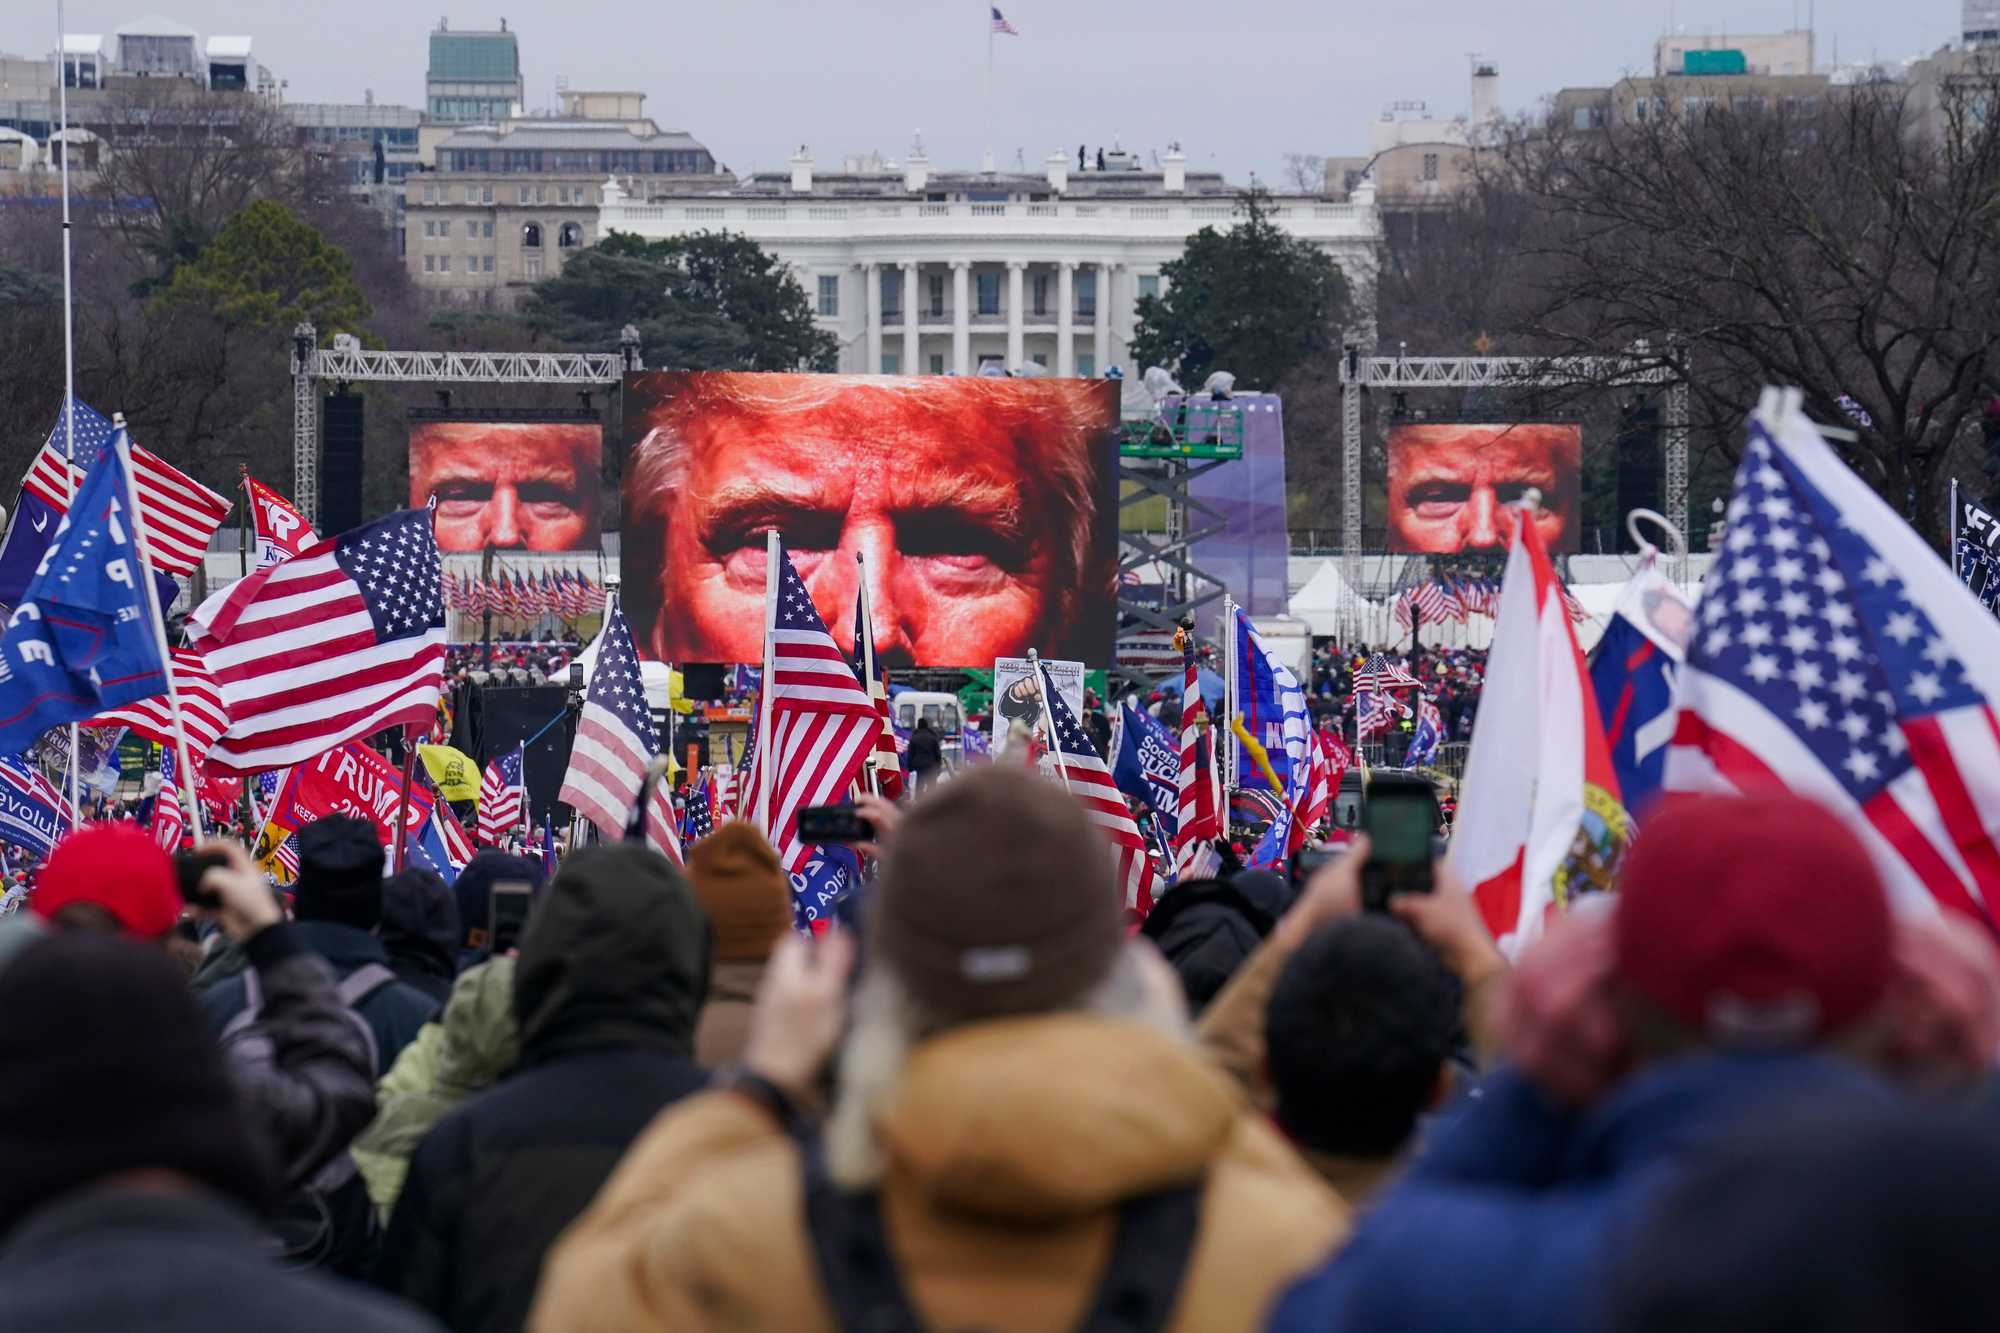 The face of then-president Trump appeared on large screens as supporters participated in a rally in Washington, D.C., on Jan. 6, 2021.